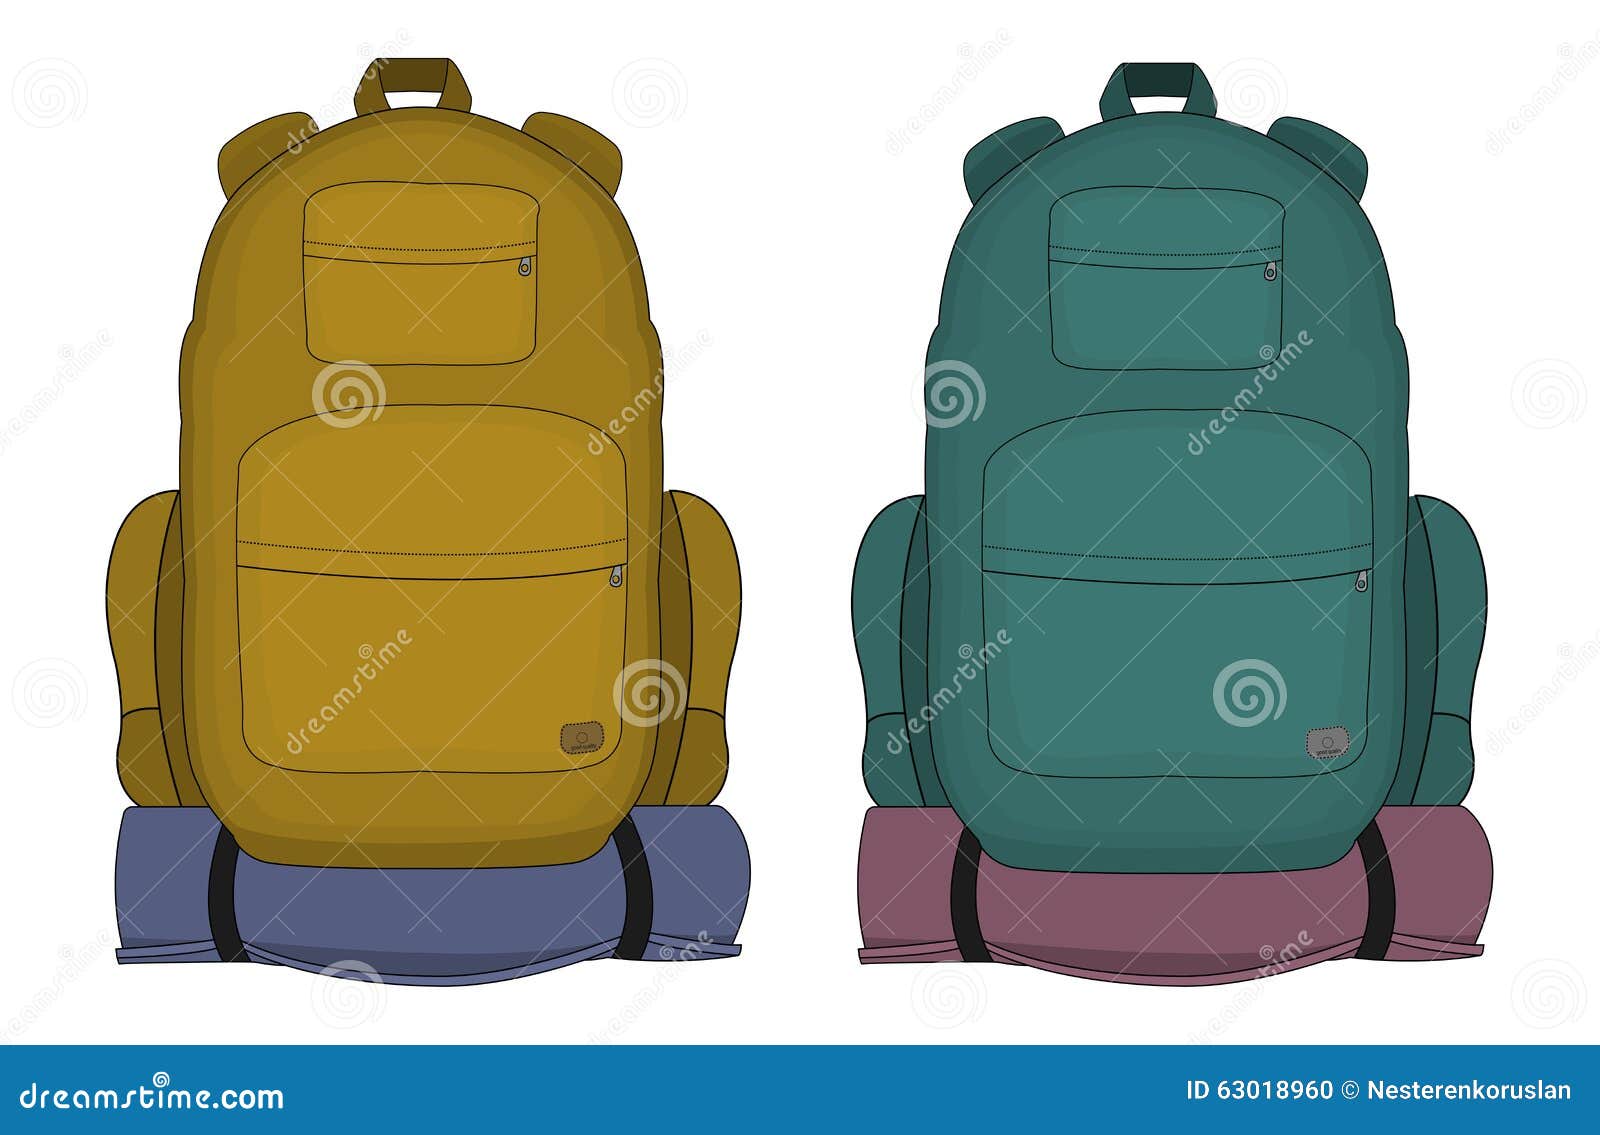 Travel backpacks. Mustard and aqua blue colors. Travel backpacks with mattress. Mustard and aqua blue colors. Vector clip art illustrations on white